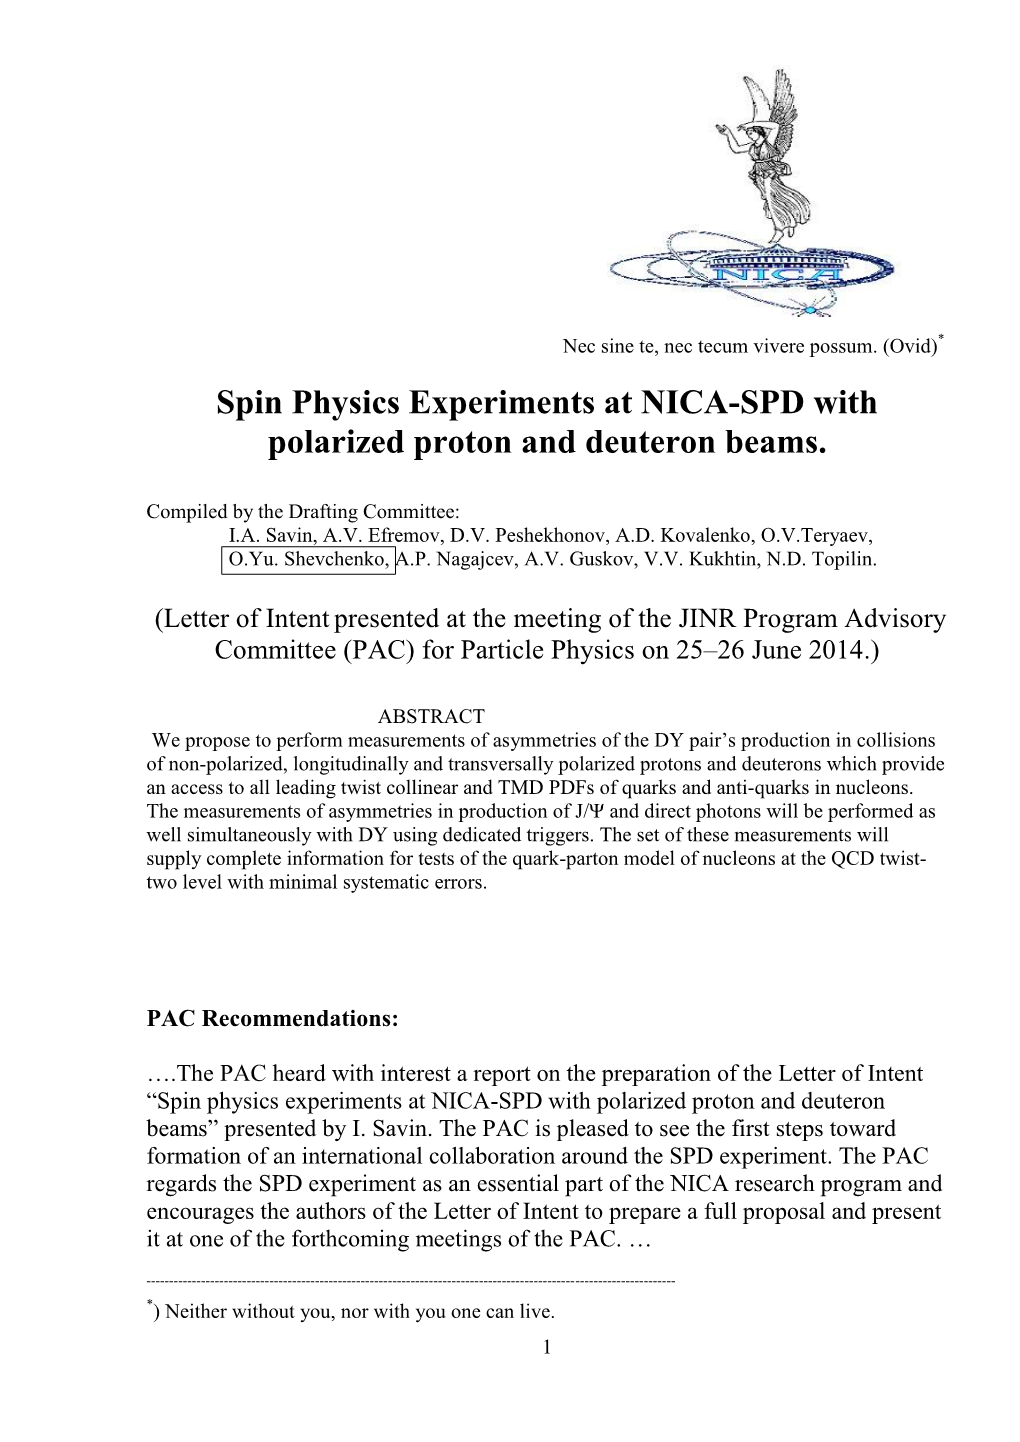 Spin Physics Experiments at NICA-SPD with Polarized Proton and Deuteron Beams